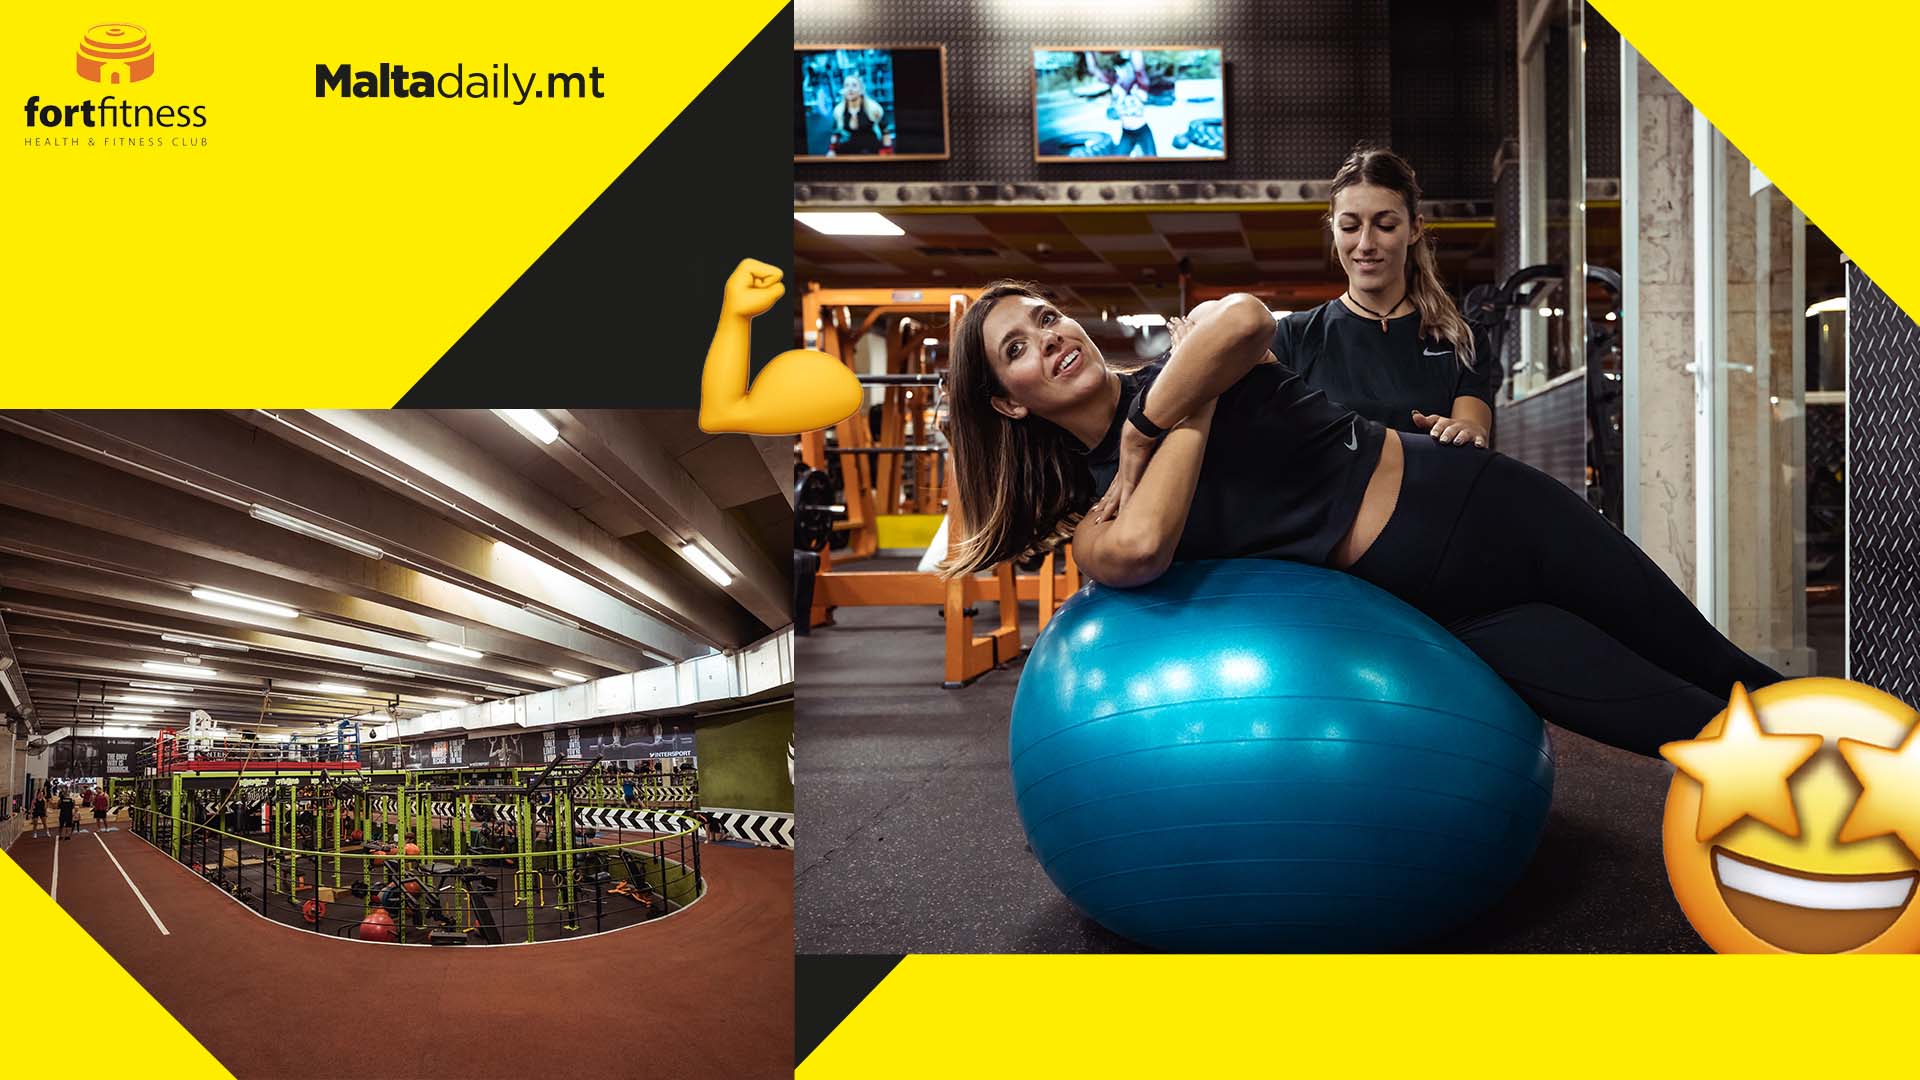 Fort Fitness is everything you could ever want in a gym and then some